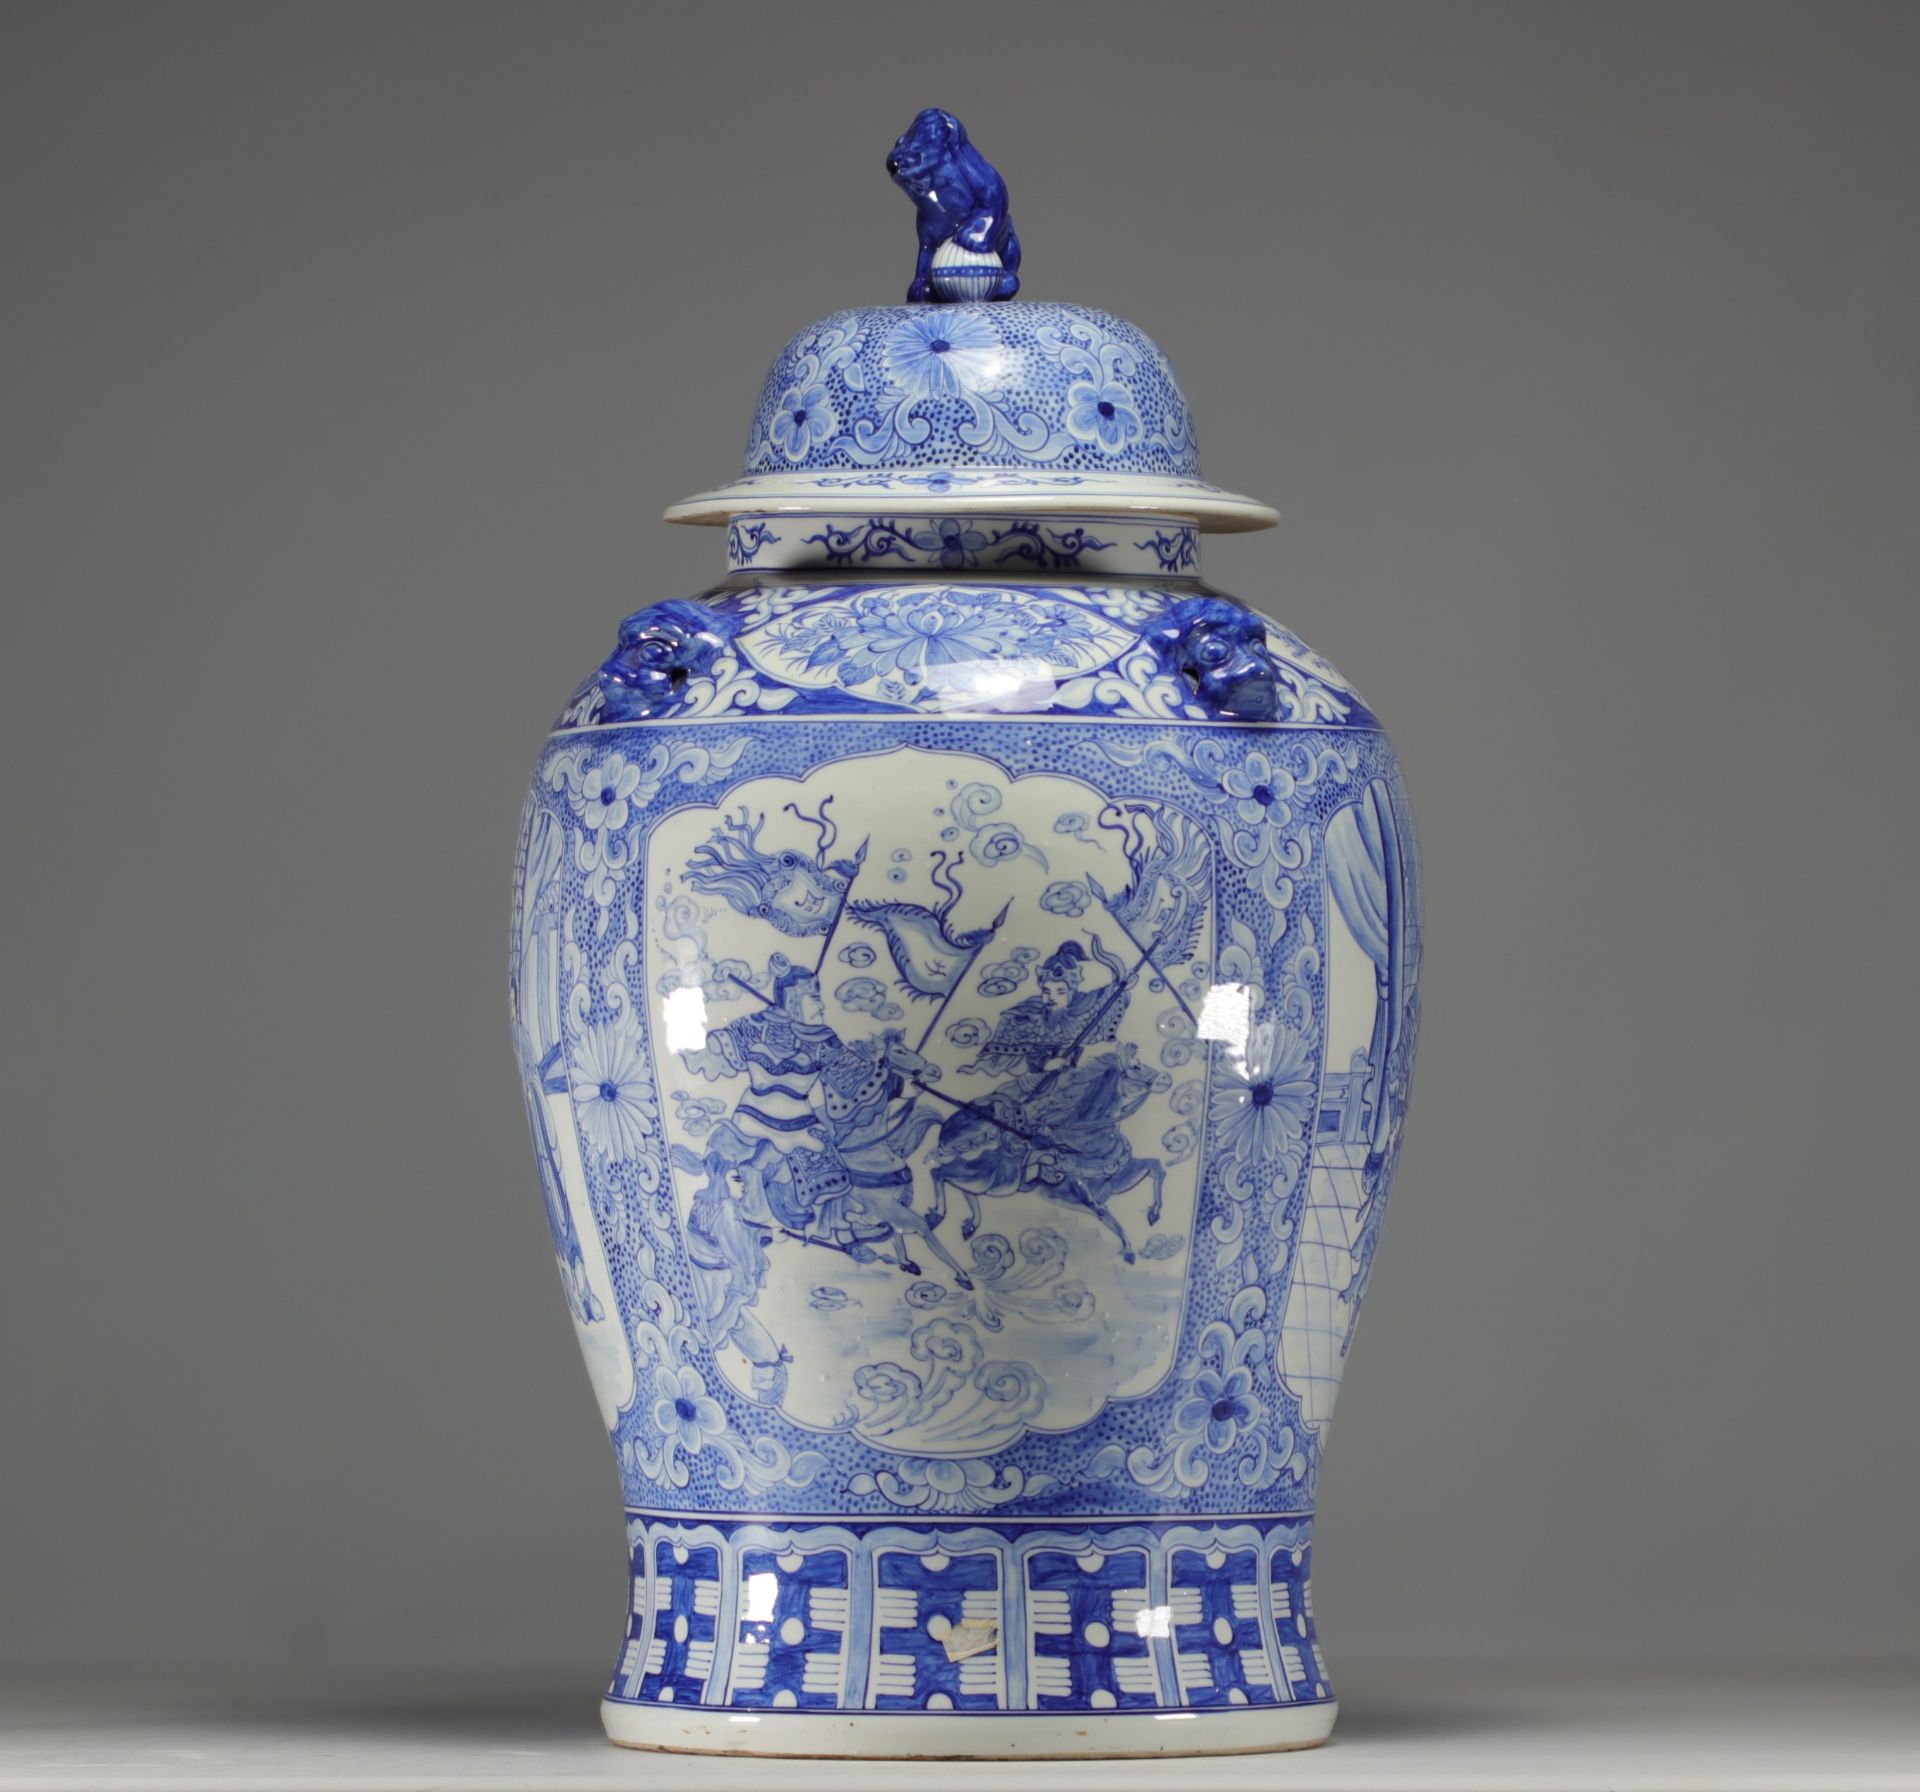 China - Large covered vase in white-blue porcelain with cartouche decoration